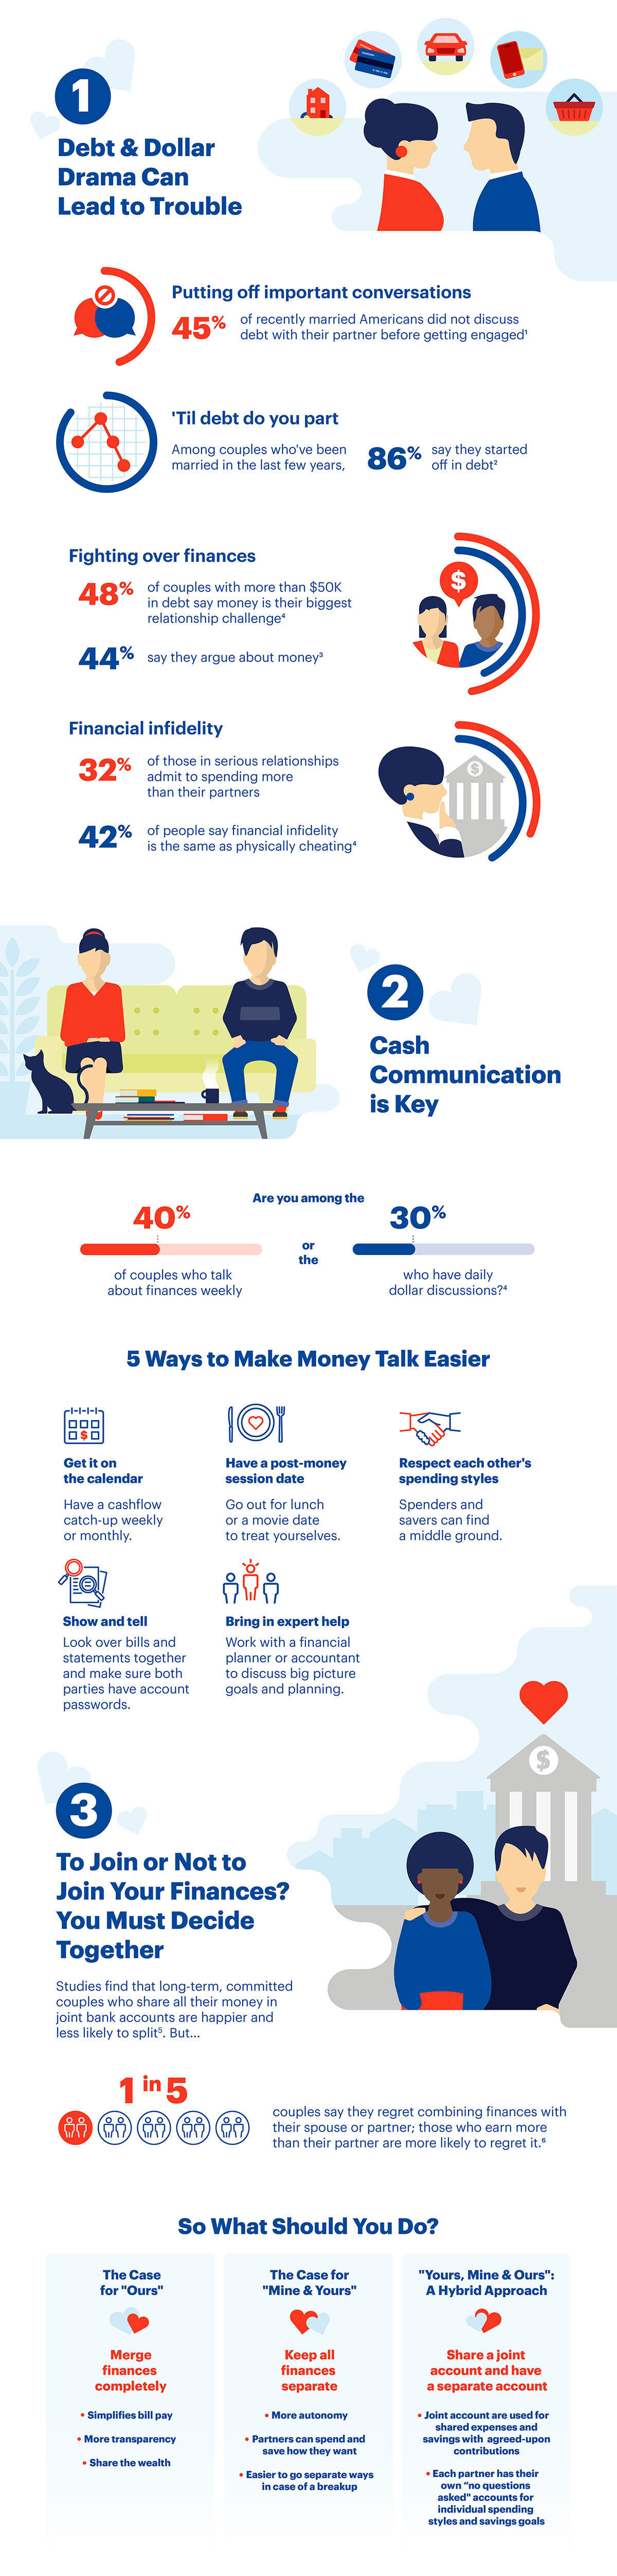 Love and Money: 3 Things To Consider Before You Combine Your Finances Infographic